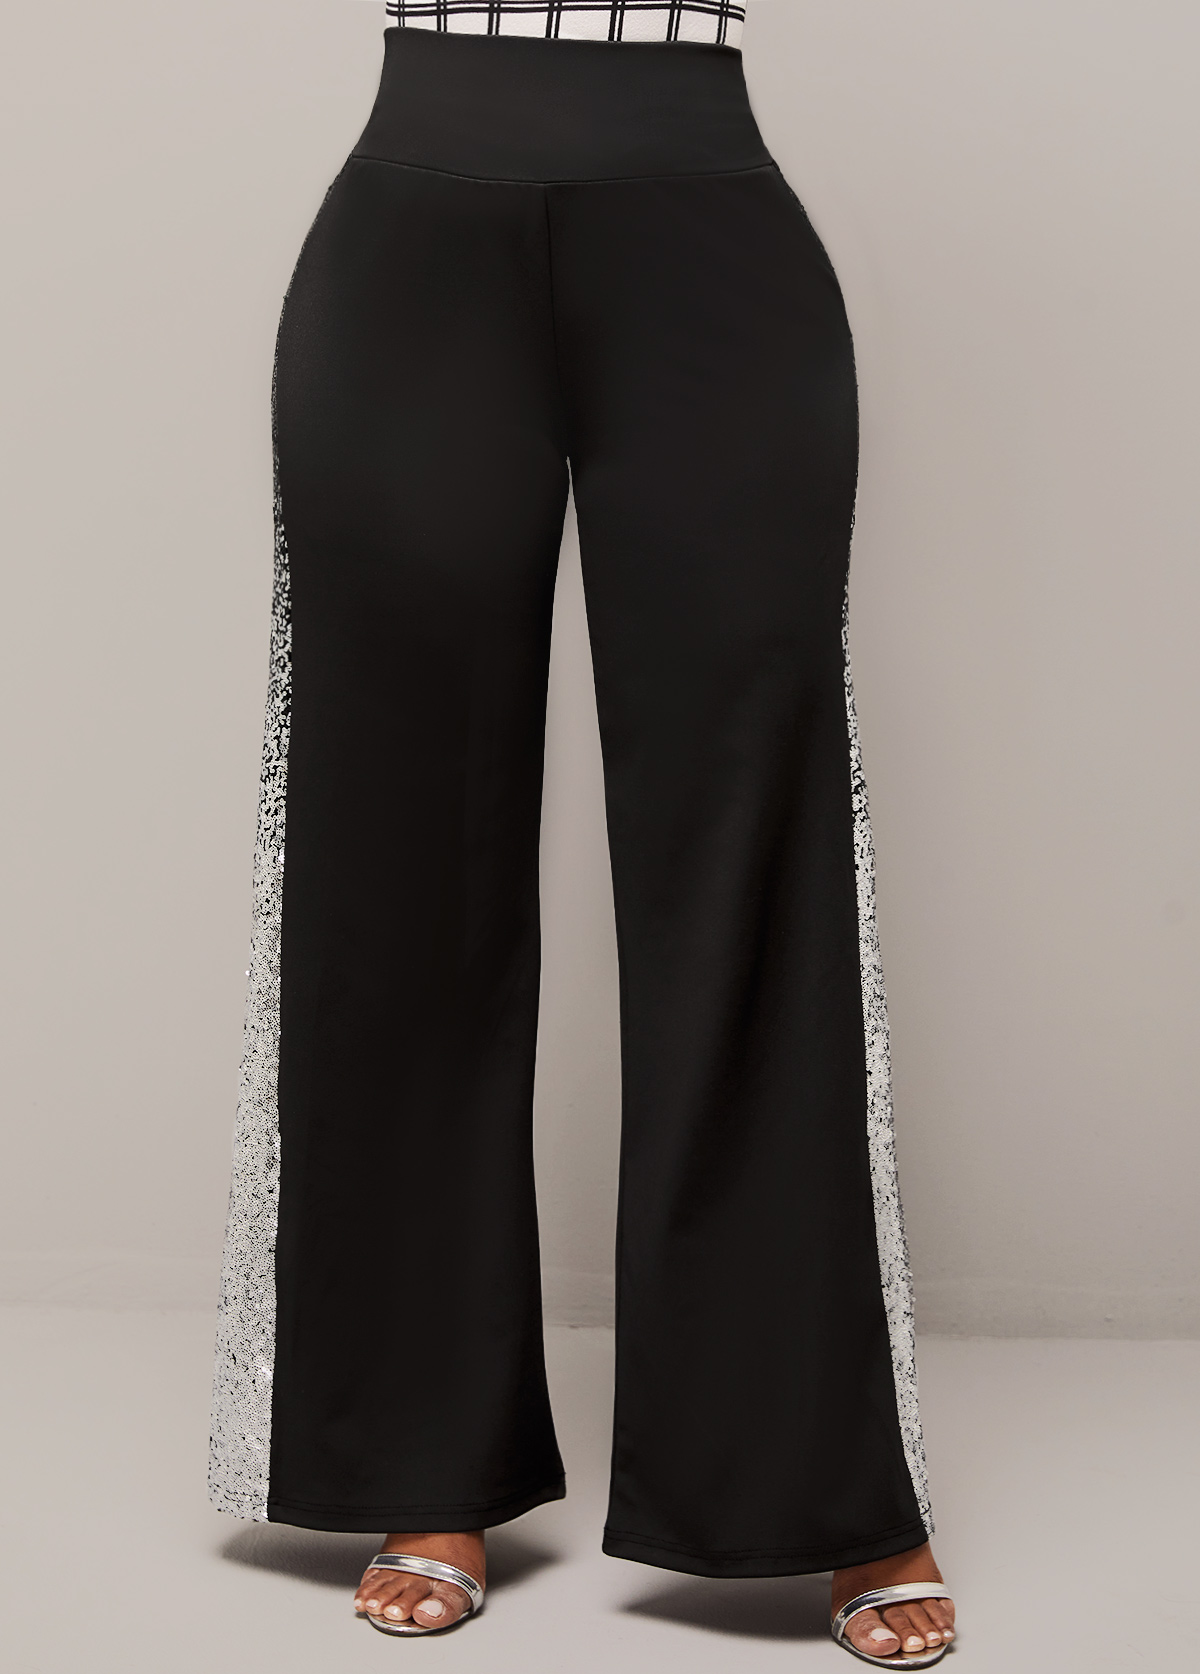 Black Ombre Sequin High Waisted Pants